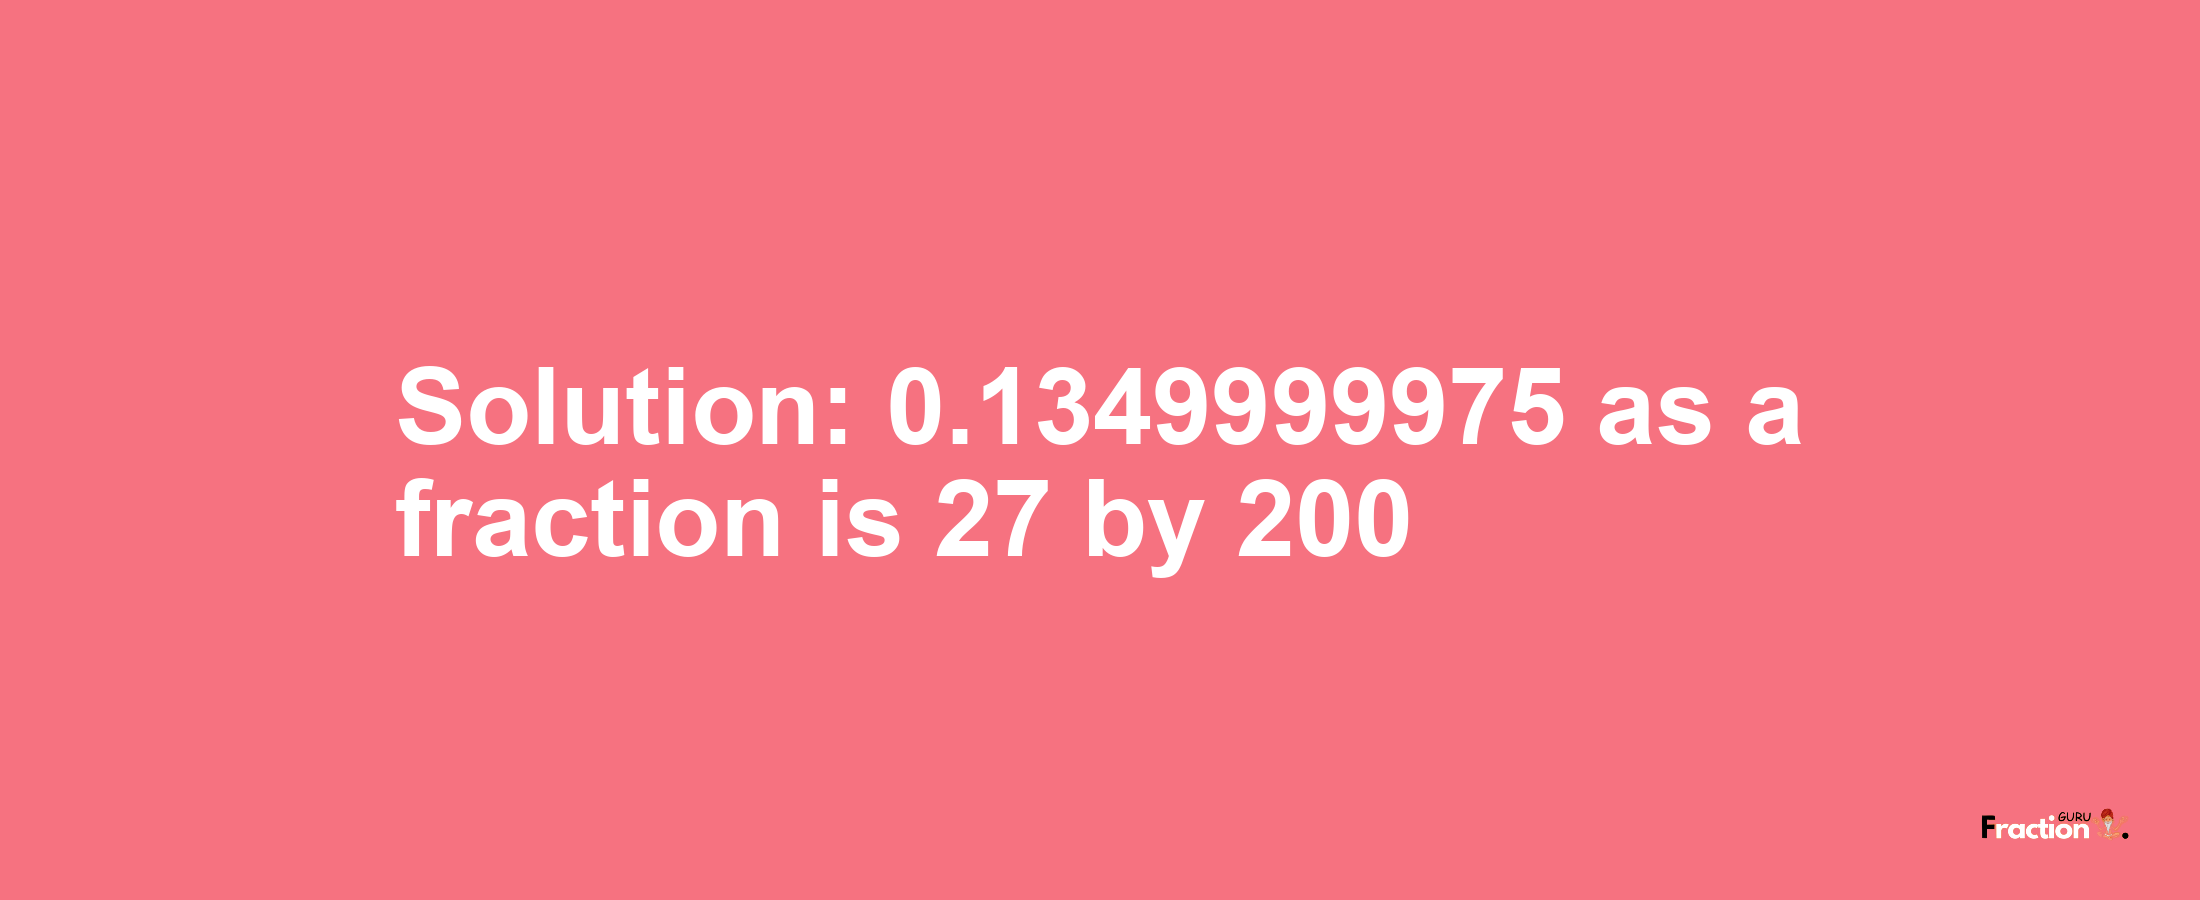 Solution:0.1349999975 as a fraction is 27/200